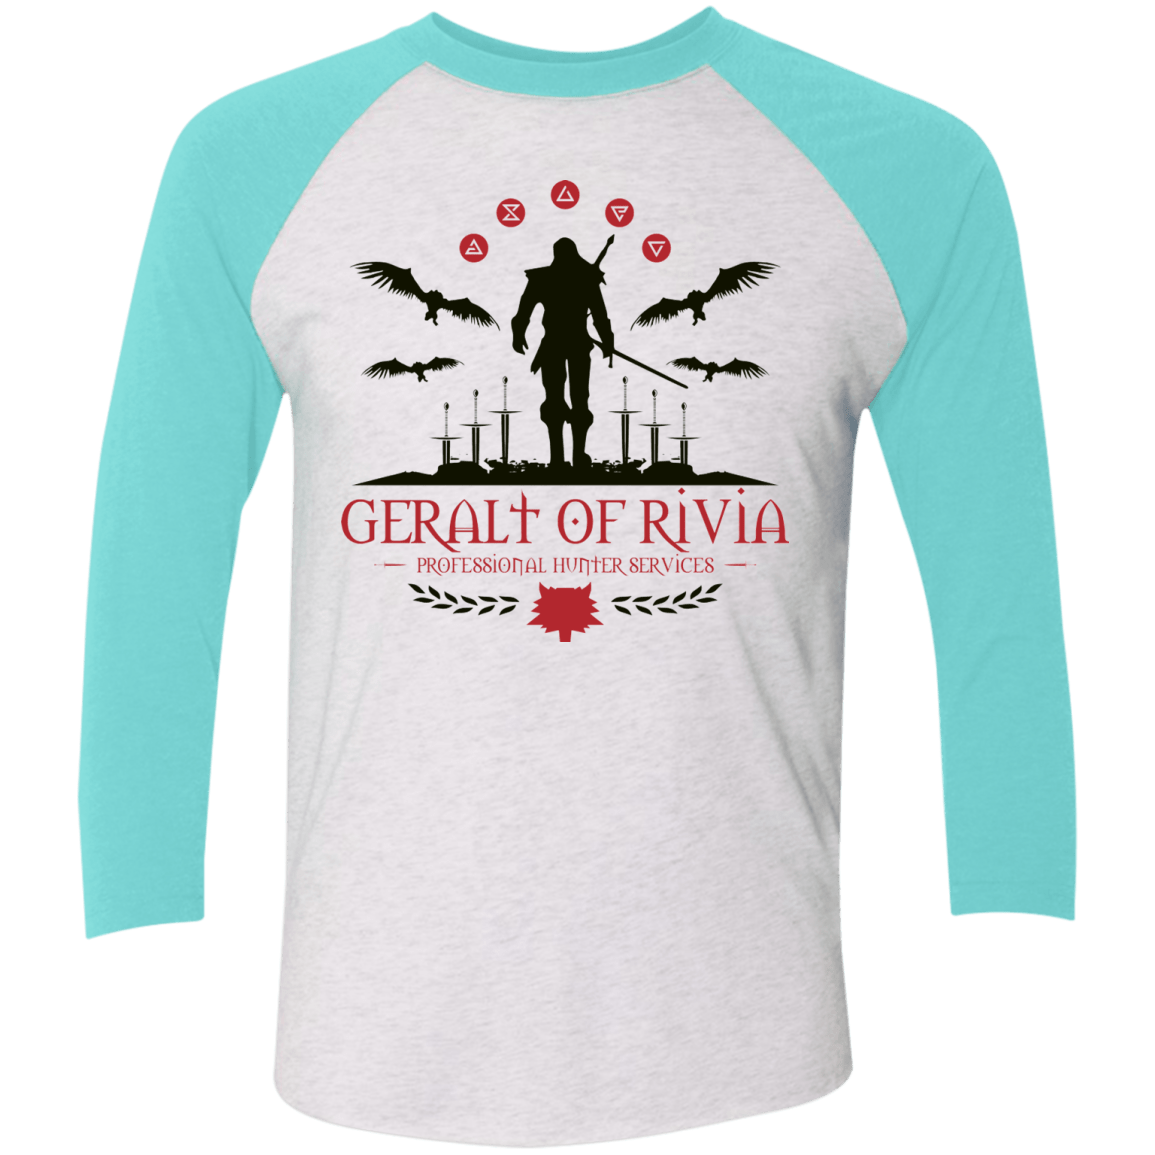 T-Shirts Heather White/Tahiti Blue / X-Small The Witcher 3 Wild Hunt Men's Triblend 3/4 Sleeve